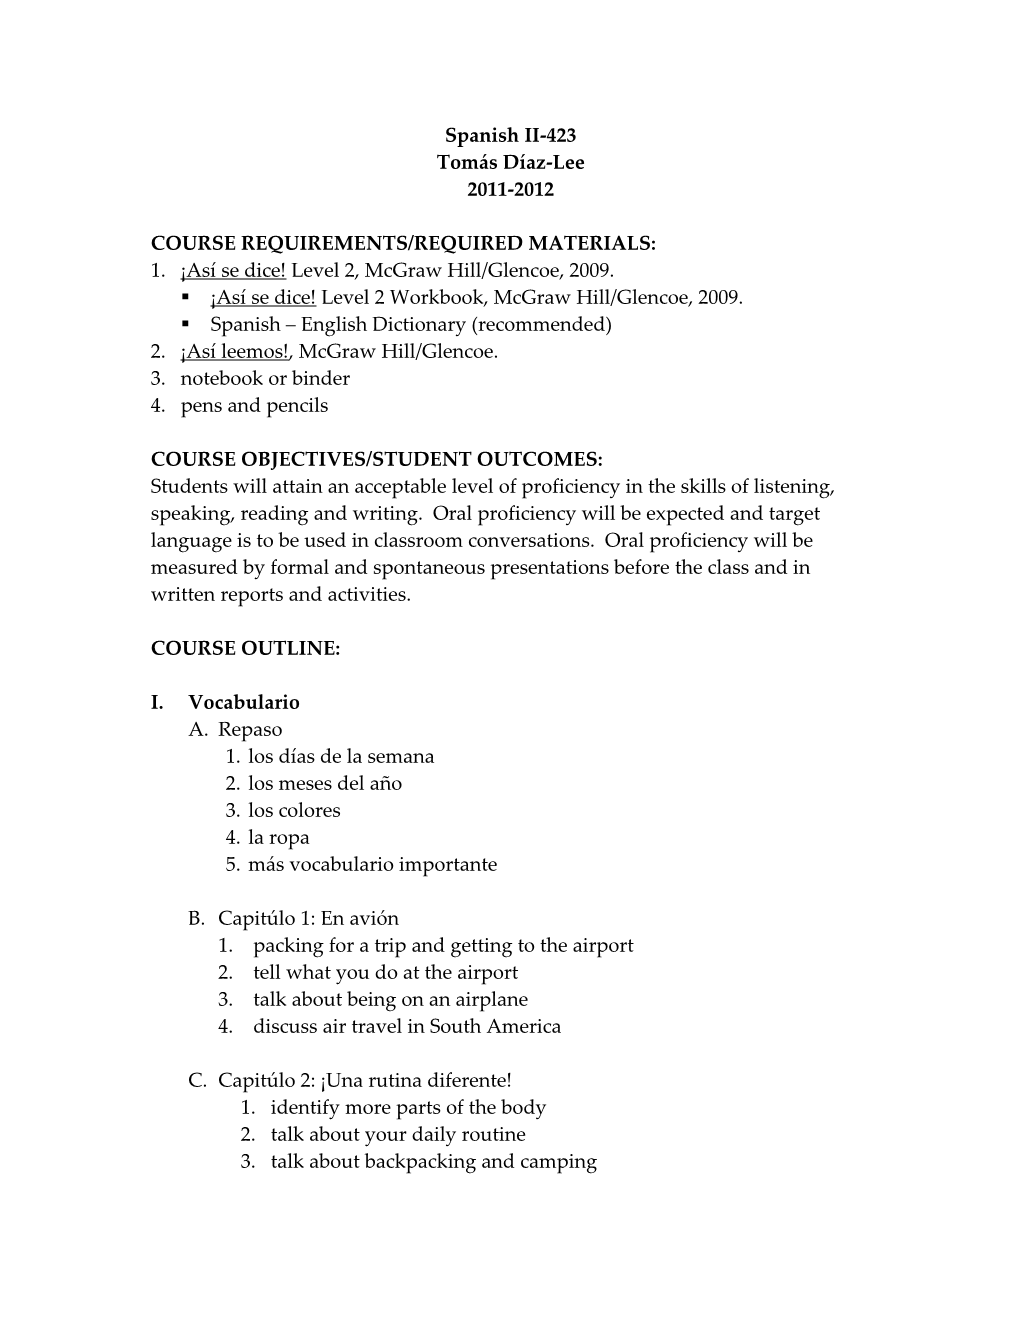 Course Requirements/Required Materials